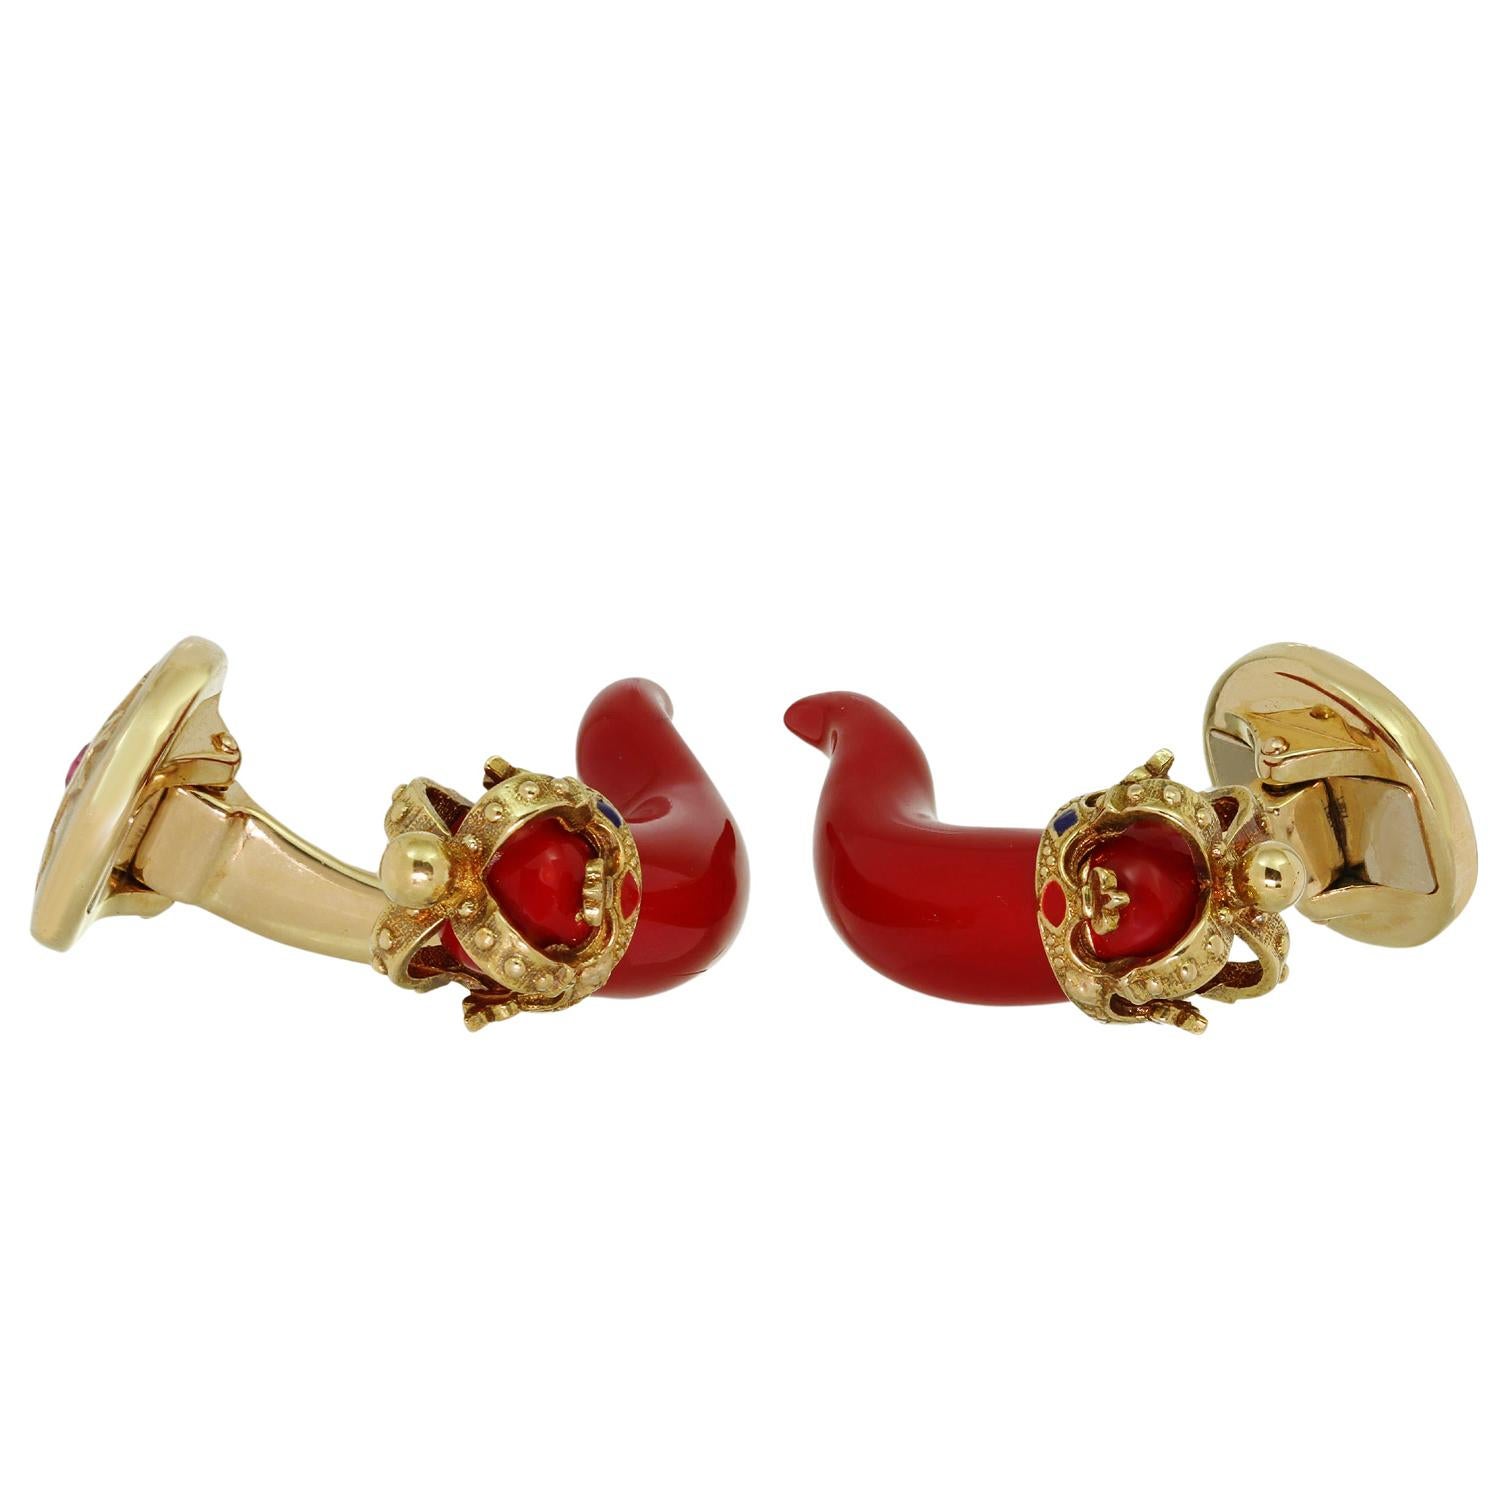 These gorgeous eye-catching Dolce & Gabbana cufflinks are crafted in 18k yellow gold and feature red enamel horn amulets with gold crowns accented with enameled designs and red rubies of an estimated 0.09 carats. Made in Italy circa 2020s.